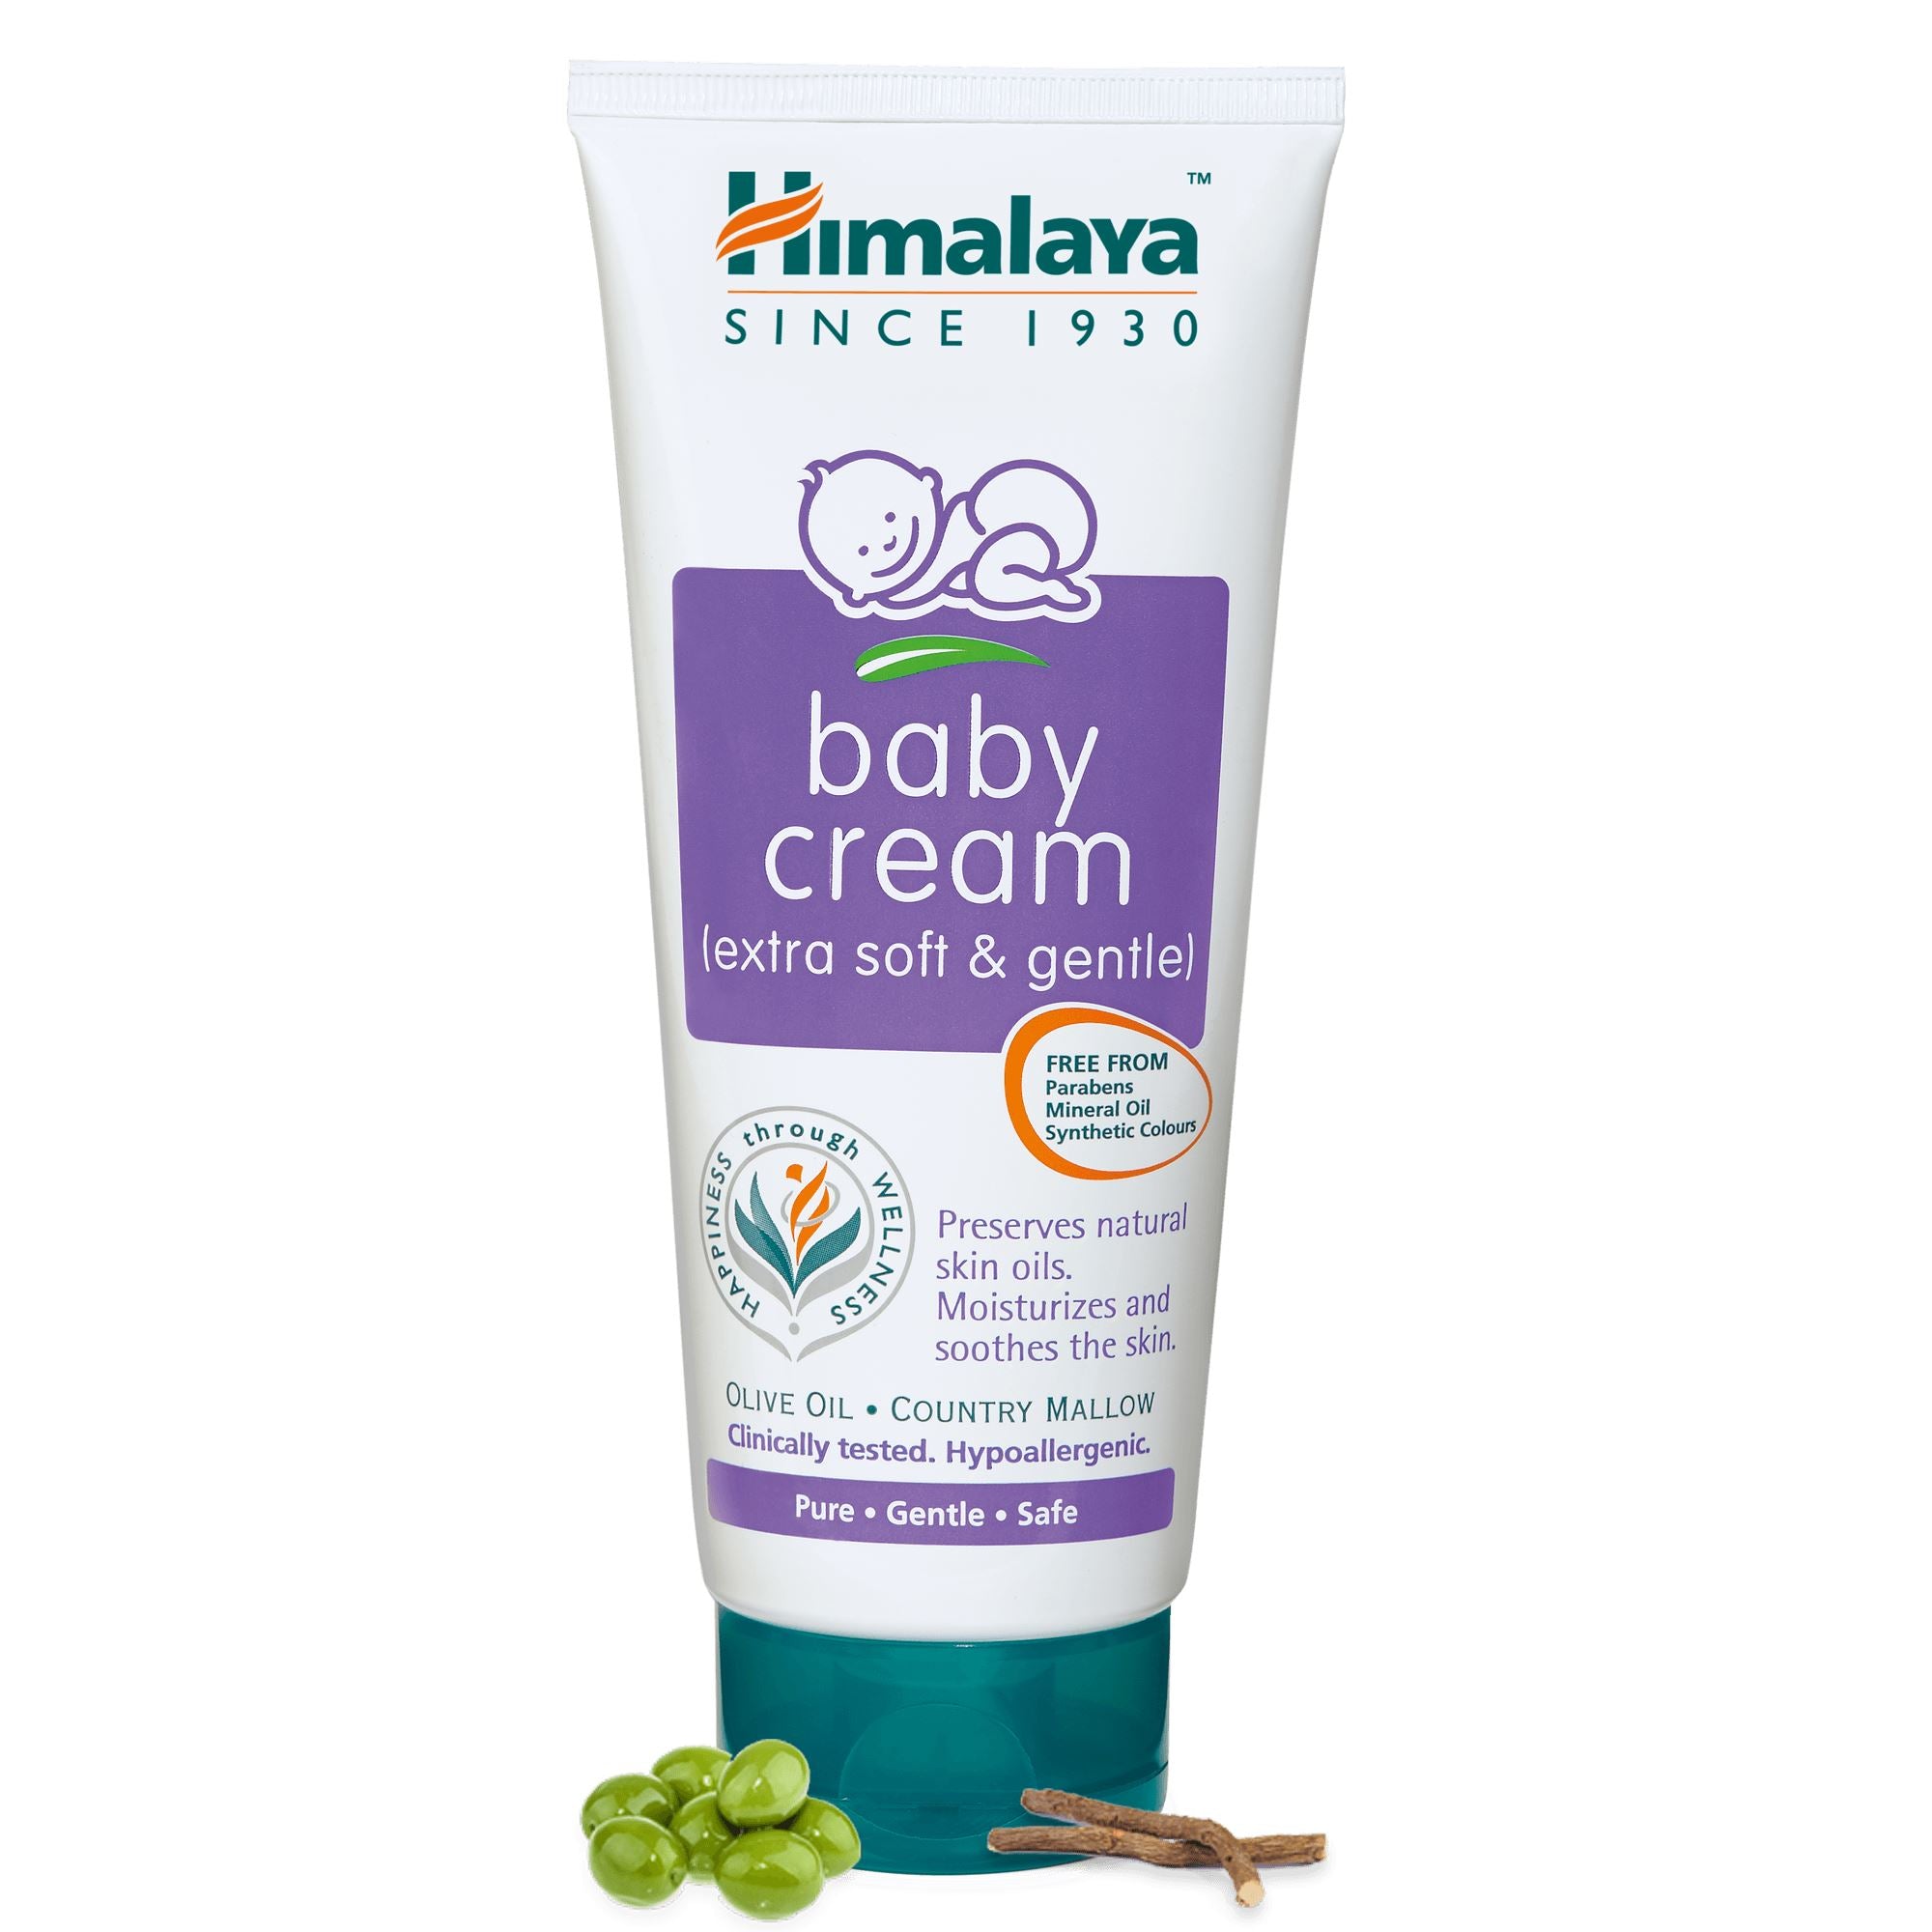 Himalaya Baby cream - Preserves softness and soothes baby’s skin